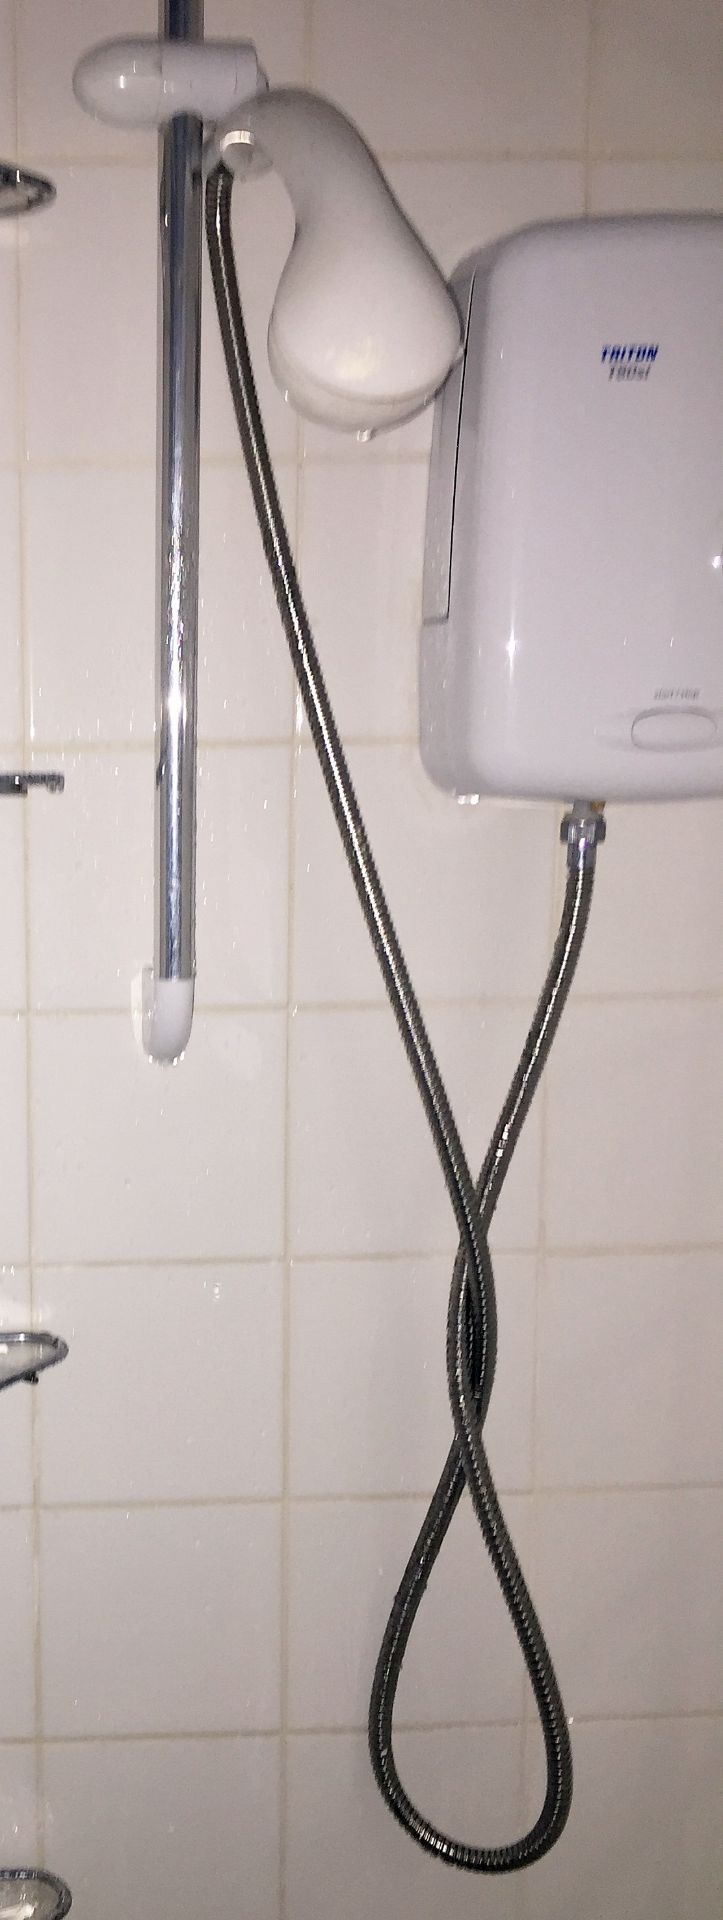 An Assortment Of Bathroom Items - Include Triton T80si Shower Plus Radiator And Round Bathroom - Image 6 of 6